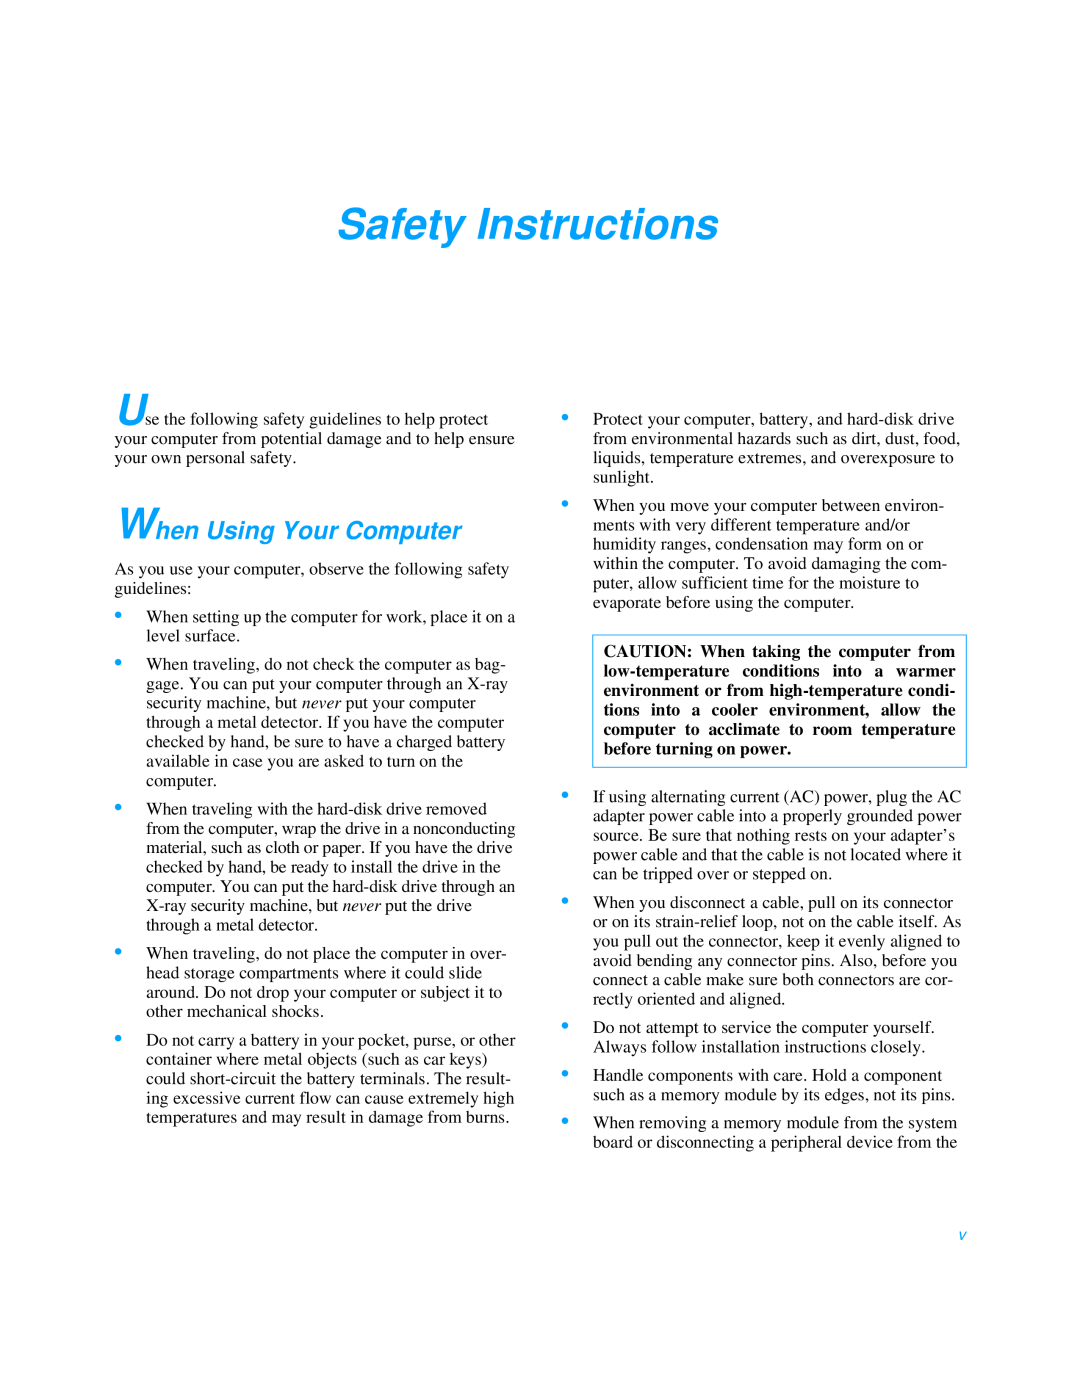 Dell 3000 manual Safety Instructions, When Using Your Computer 